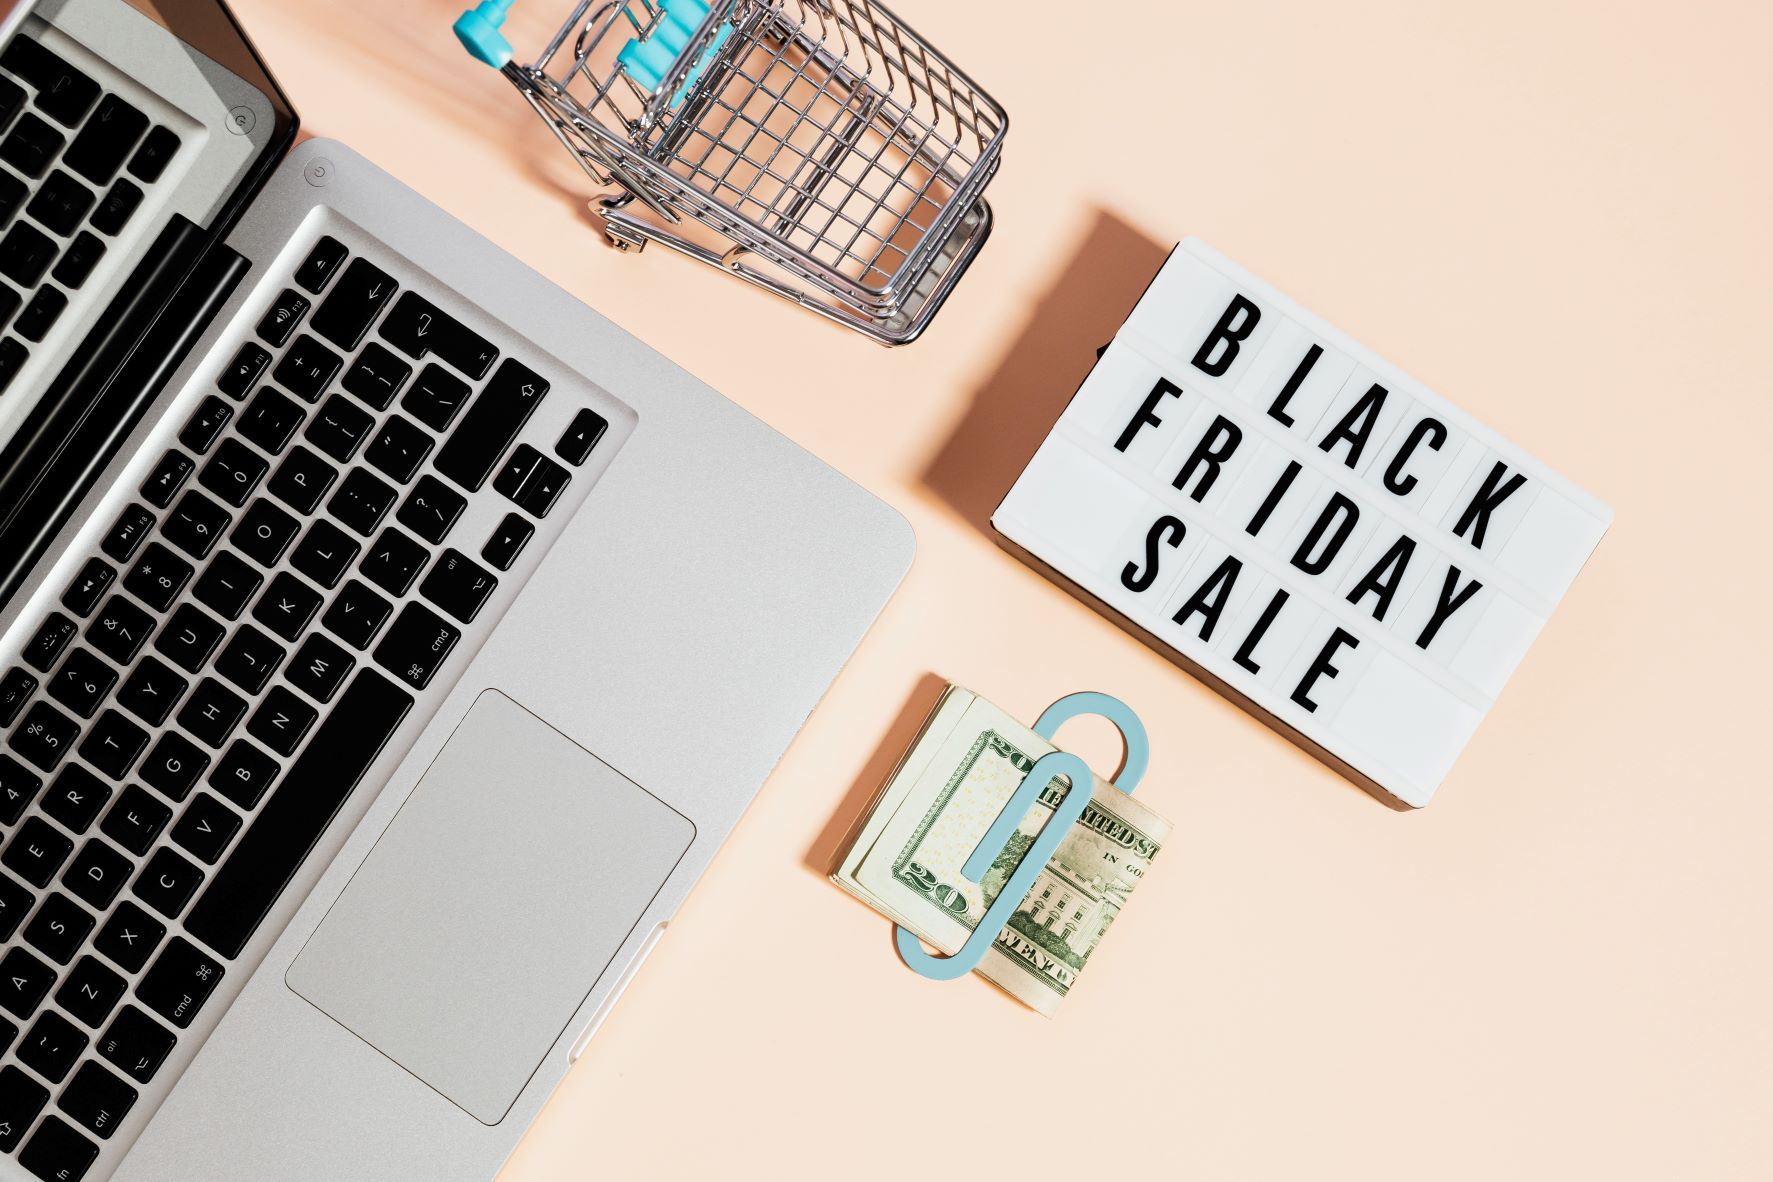 We Scraped Black Friday Deals - Are They Worth Waiting a Year?